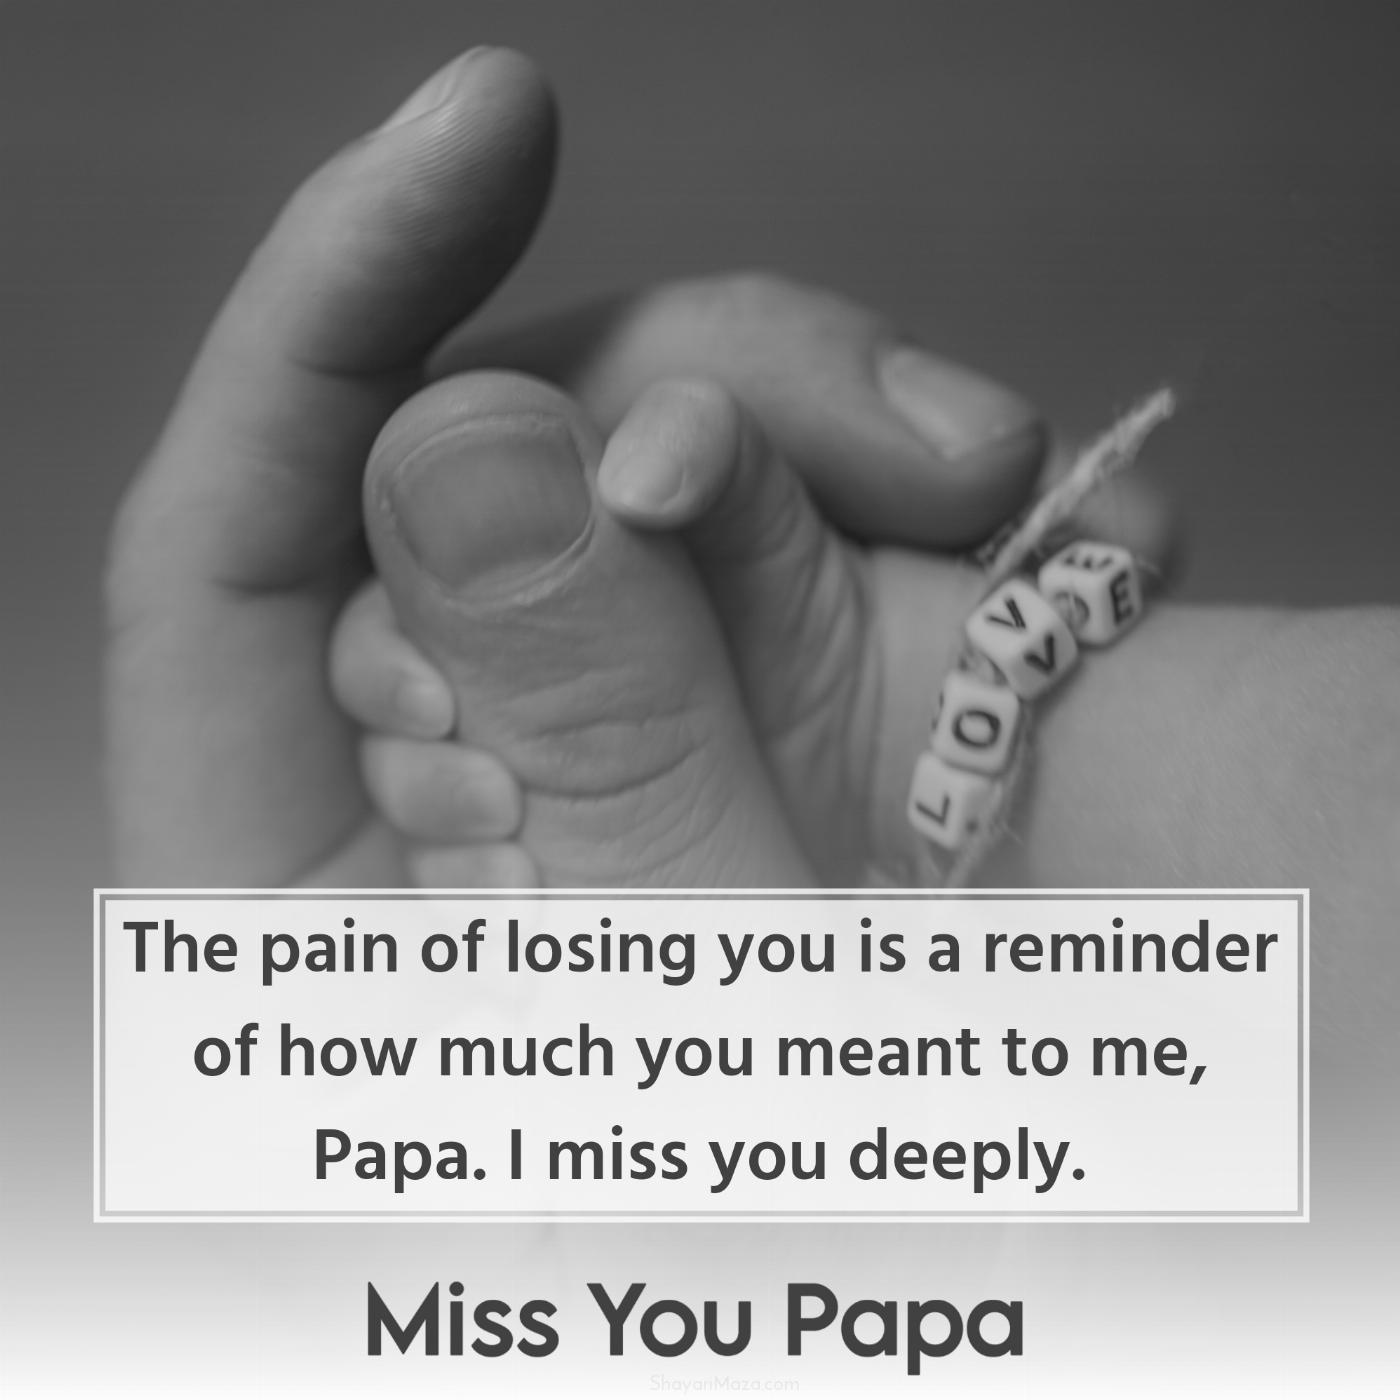 The pain of losing you is a reminder of how much you meant to me Papa